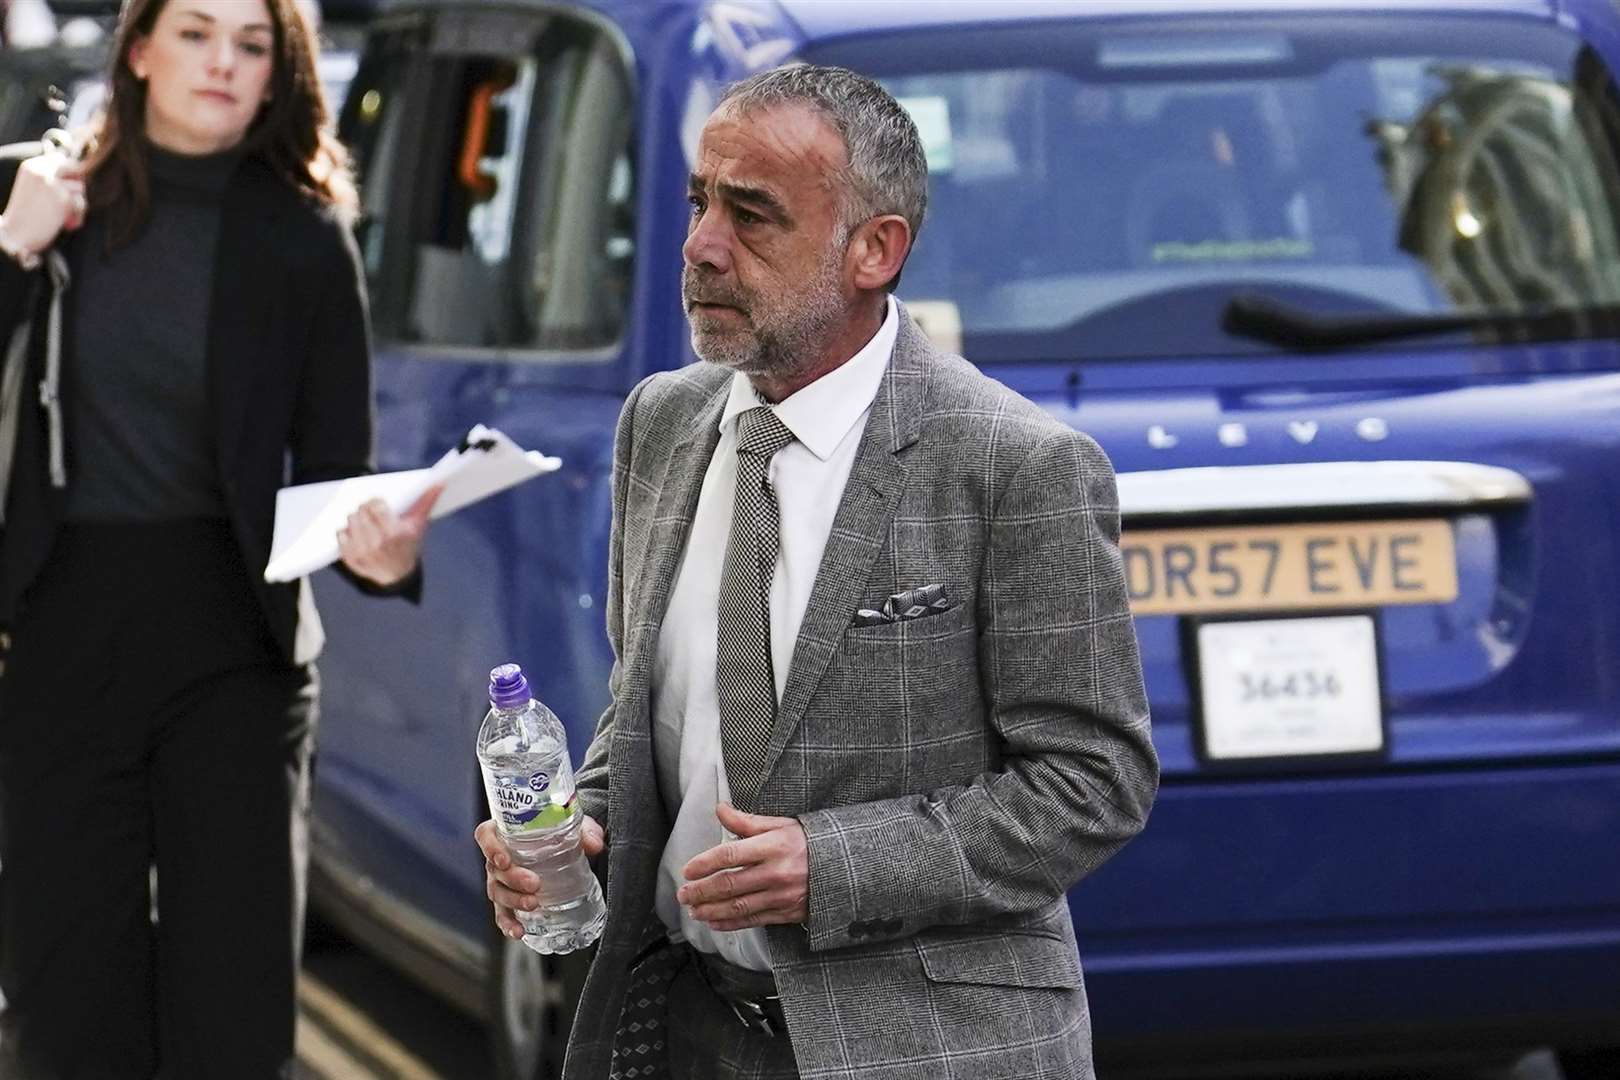 Coronation Street actor Michael Turner, known professionally as Michael Le Vell, is also taking action (Jordan Pettitt/PA)